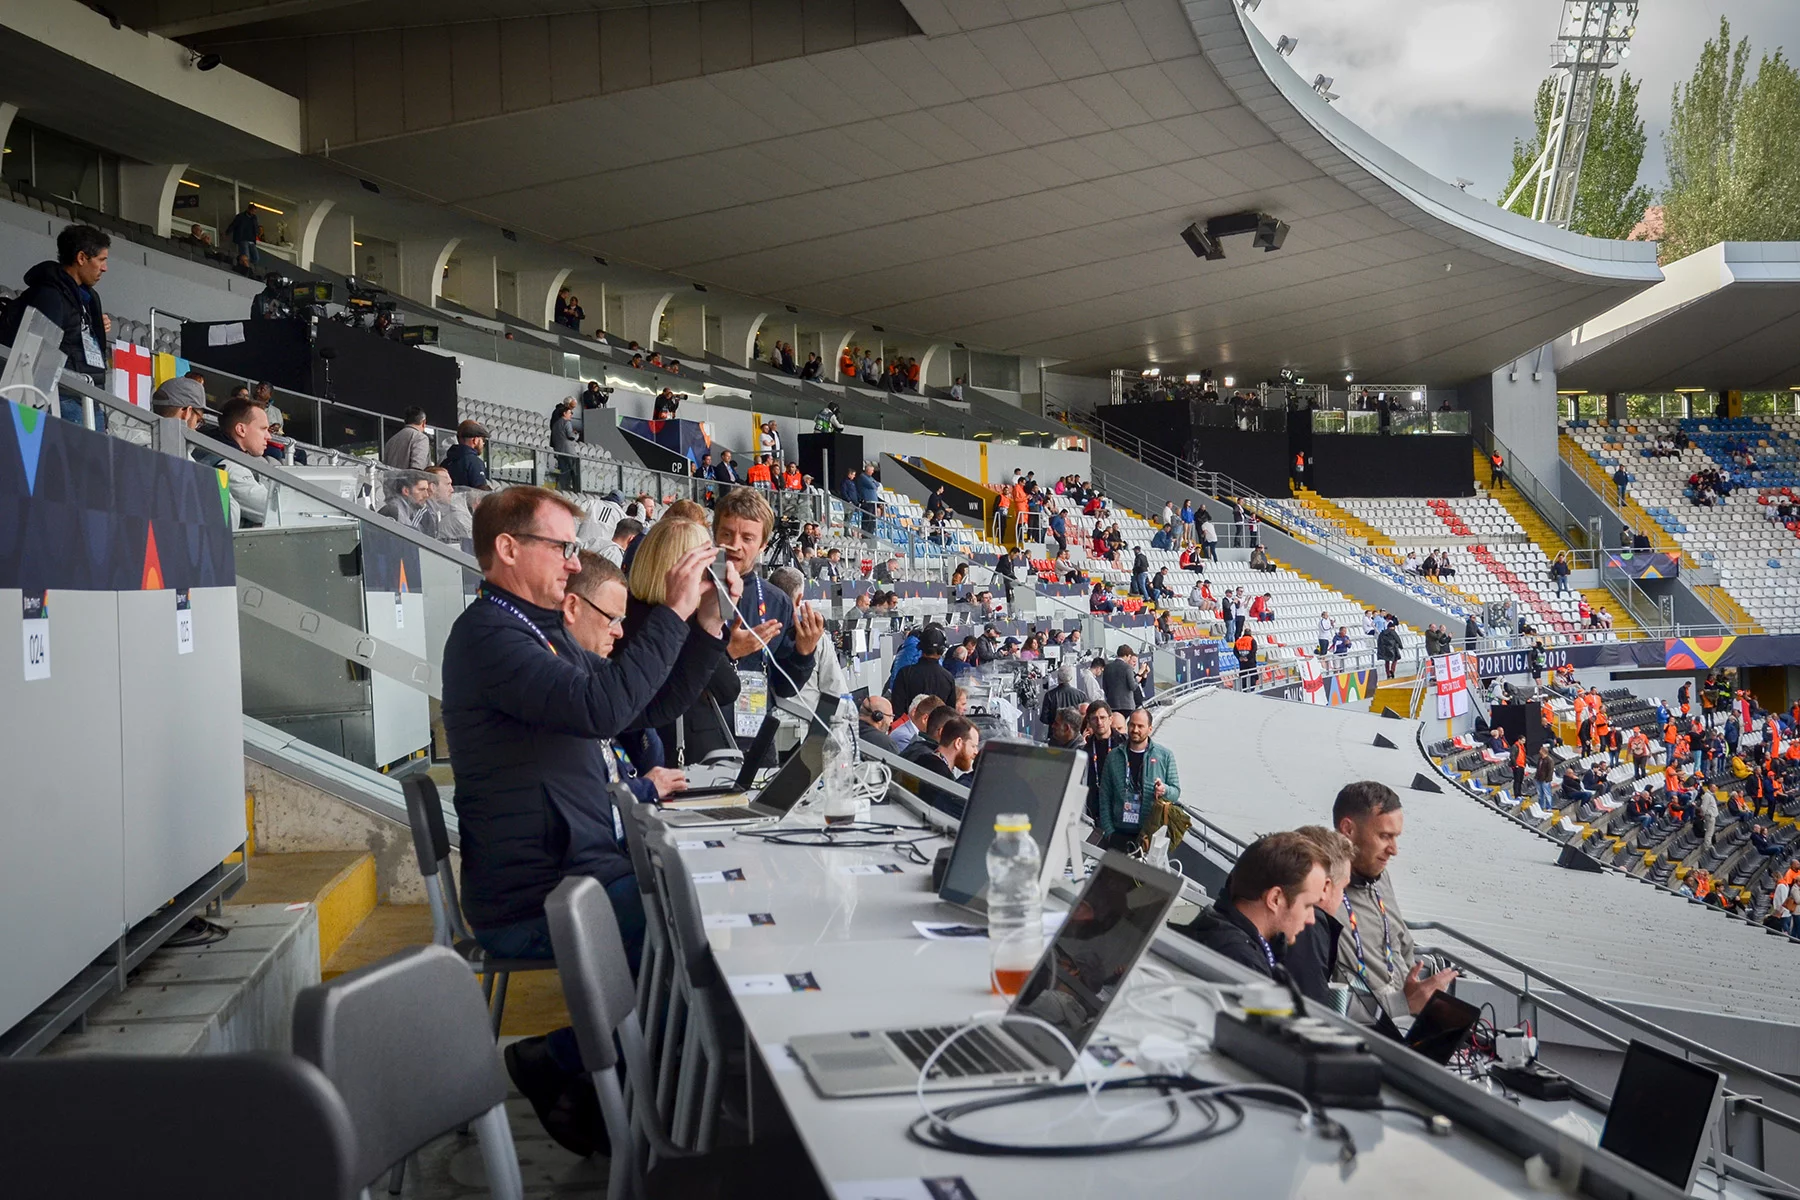 Freelance football journalists working at a match in Portugal